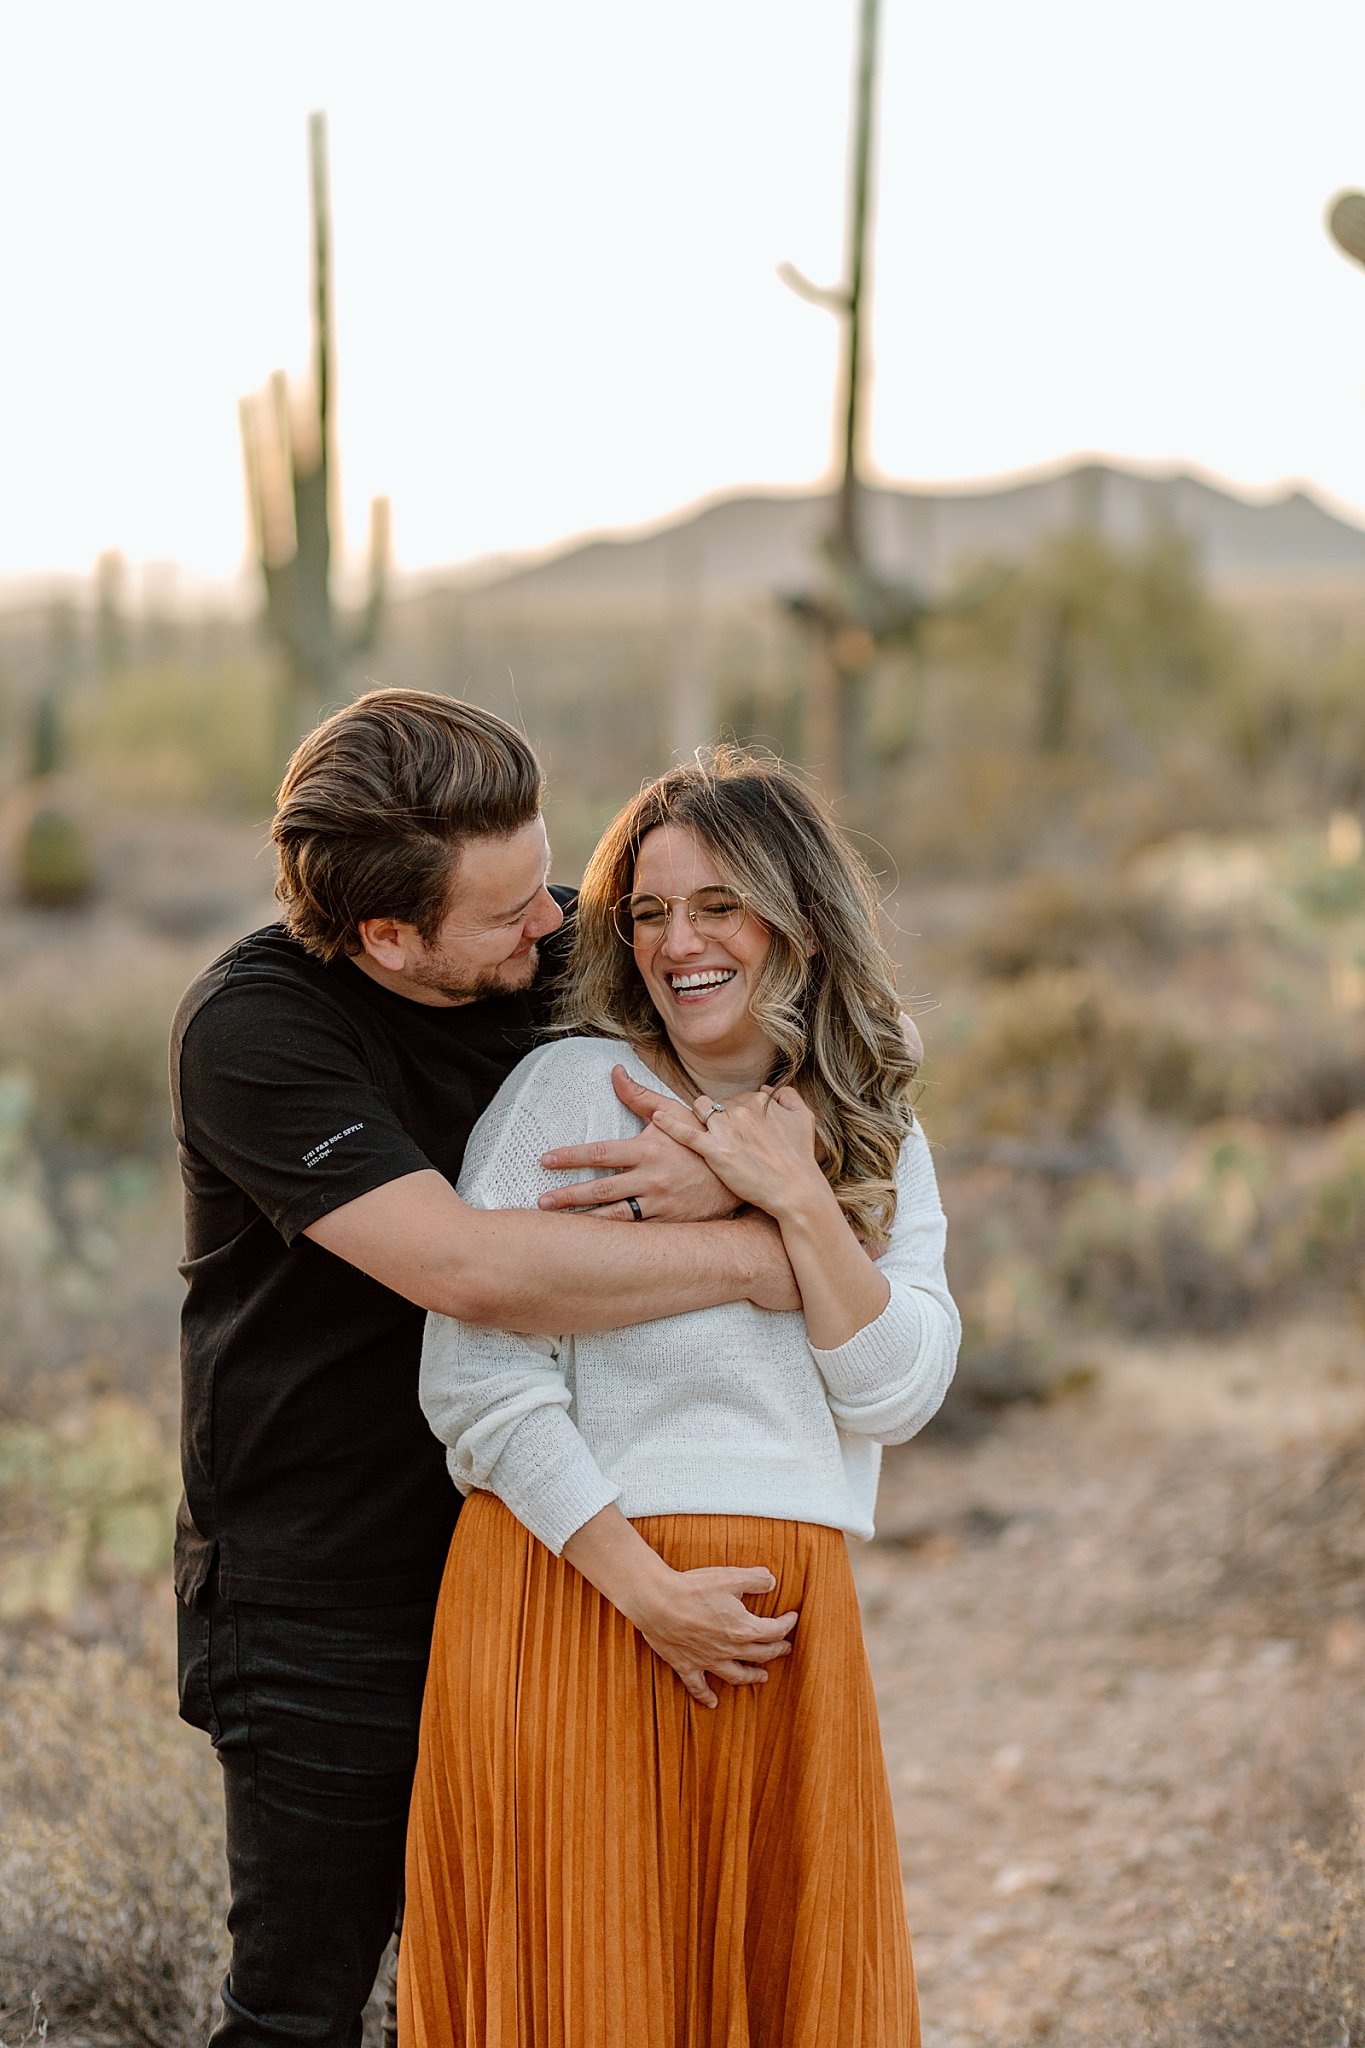  parents-to-be smile while hugging by Arizona Couples Photographer 